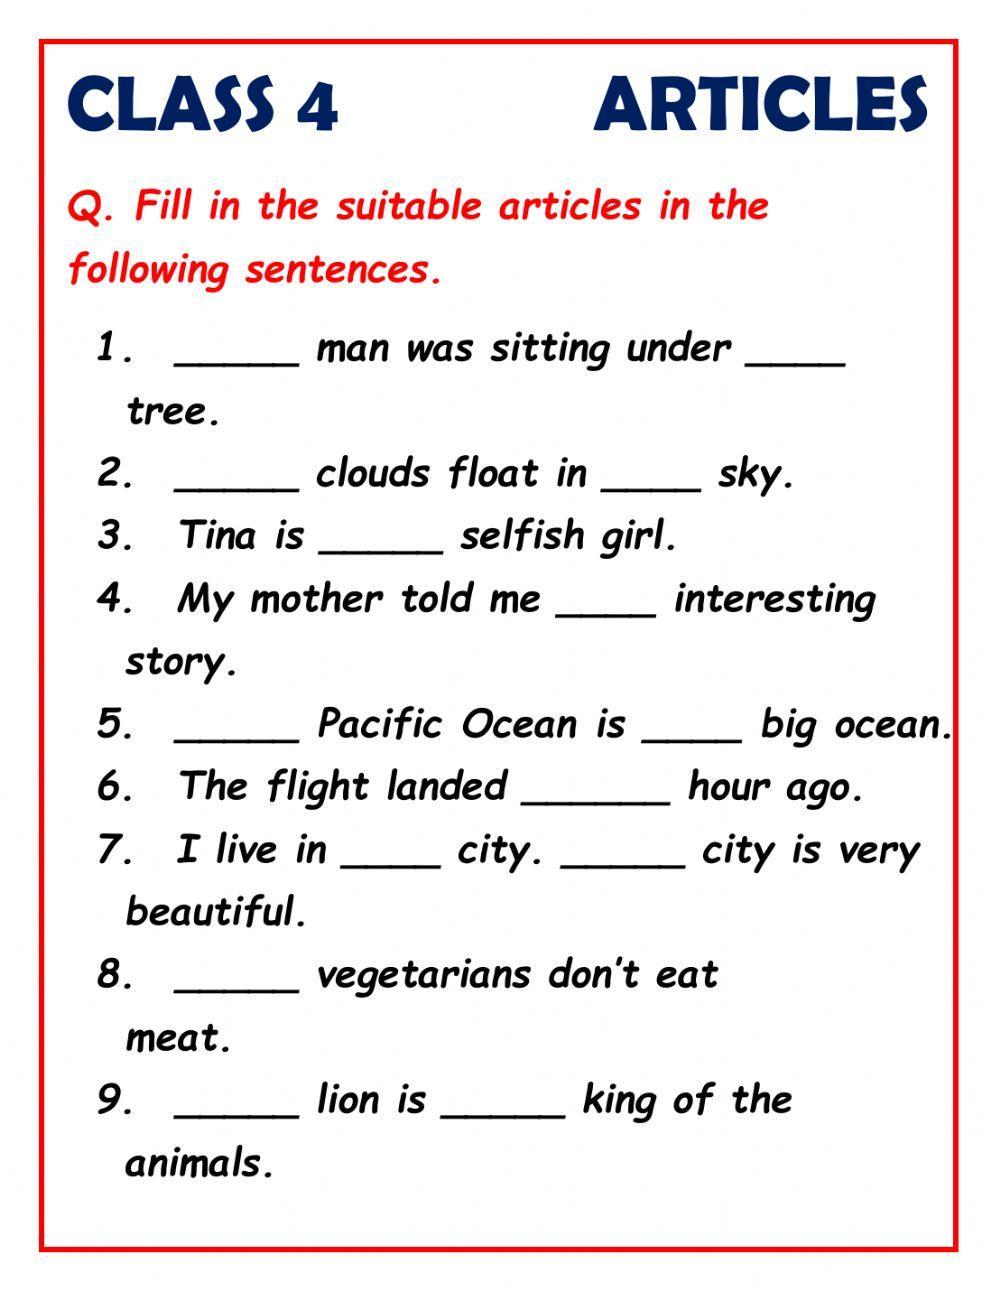 Articles for class 4